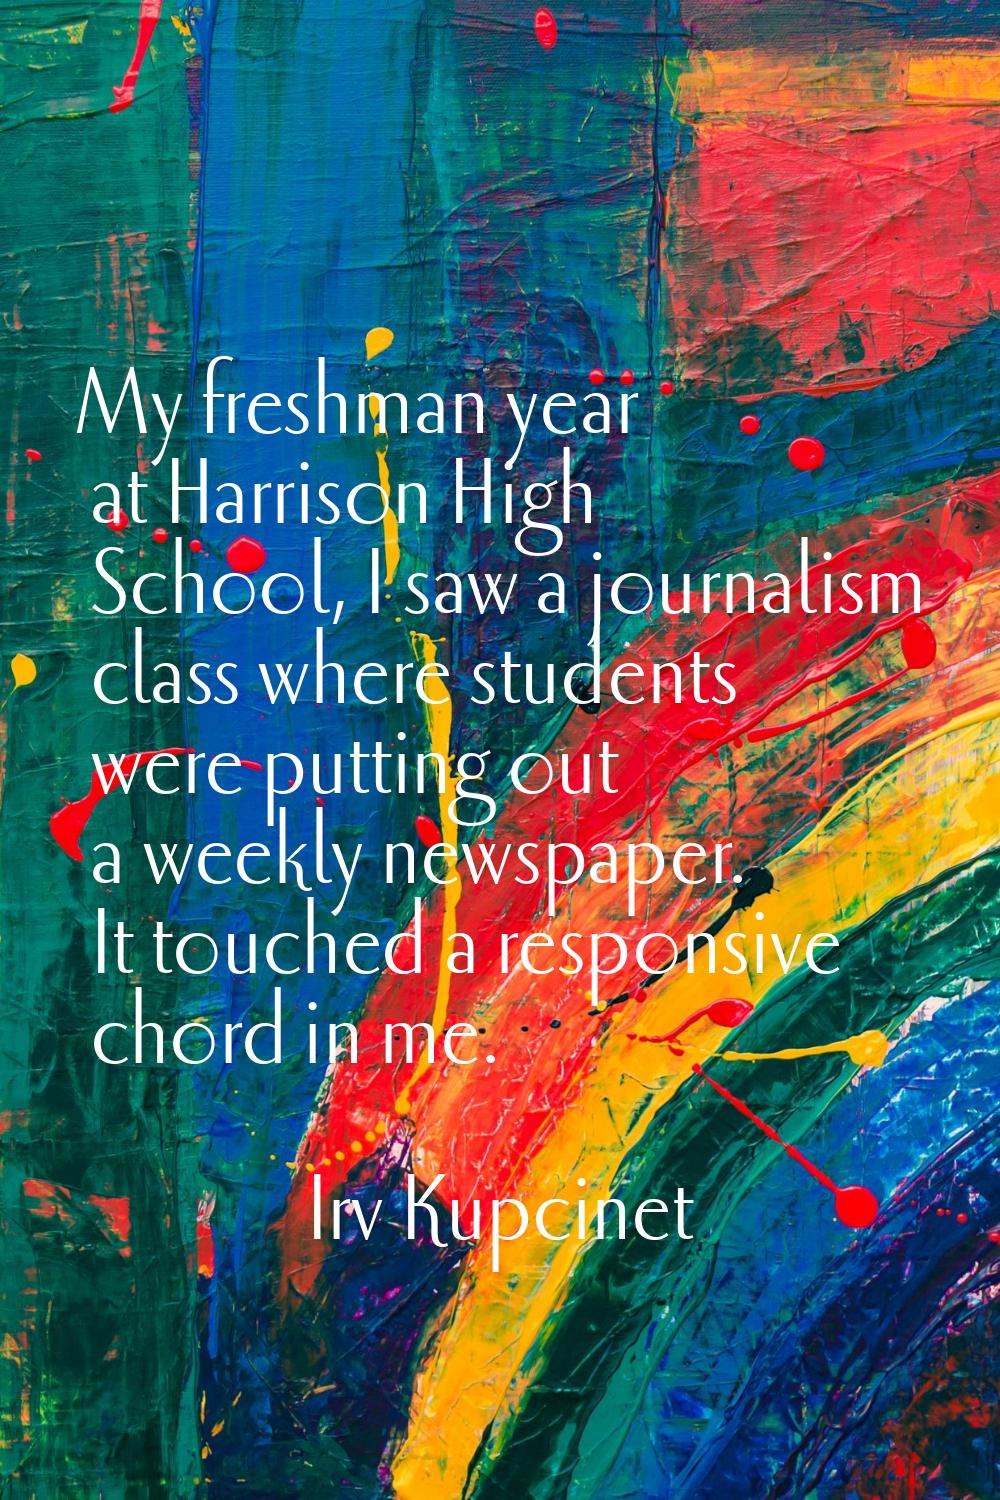 My freshman year at Harrison High School, I saw a journalism class where students were putting out 